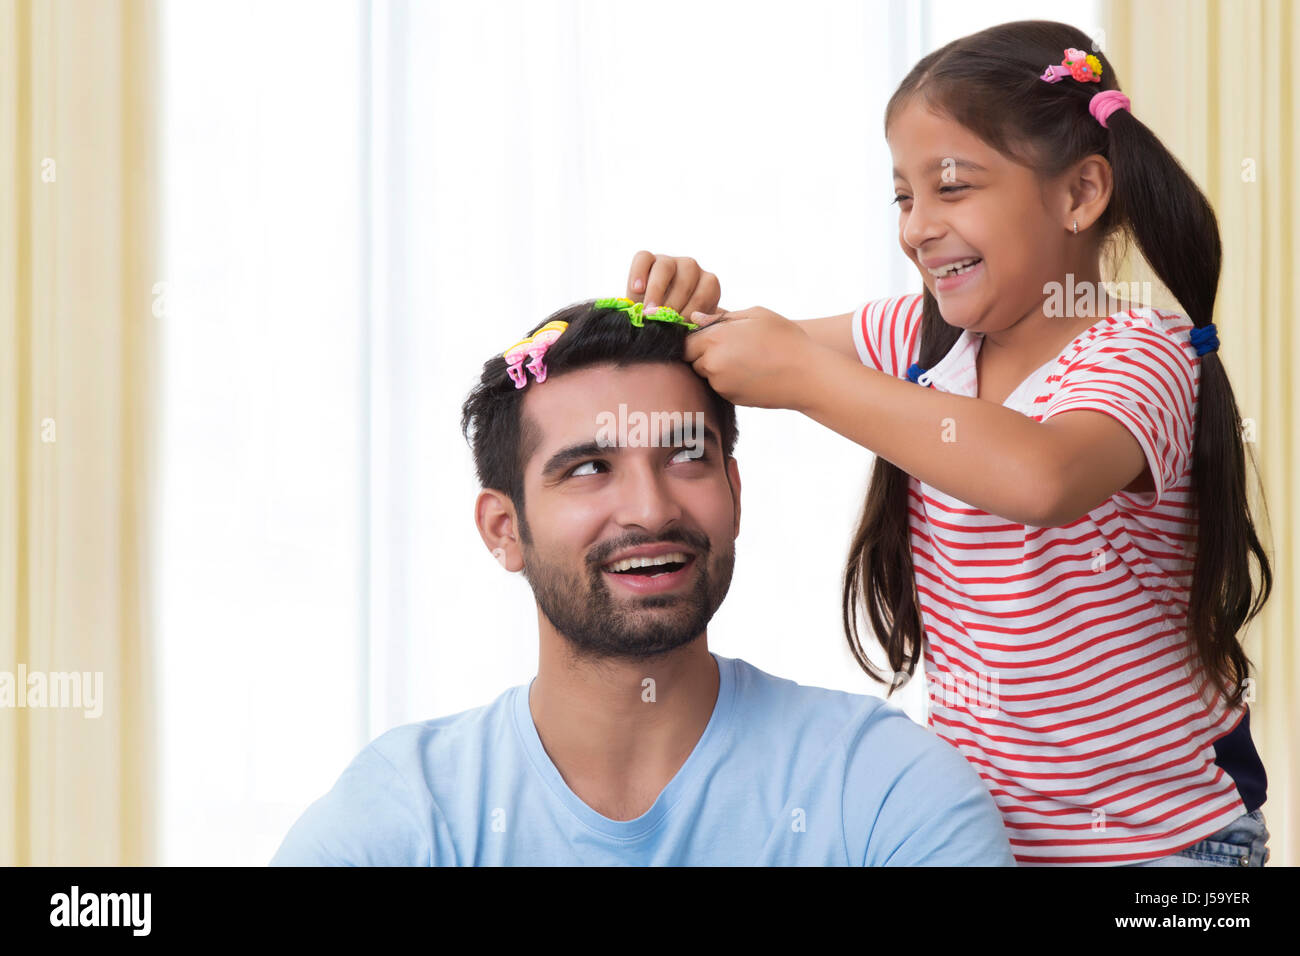 Daughter placing clips in fathers hair and making funny hair style Stock Photo